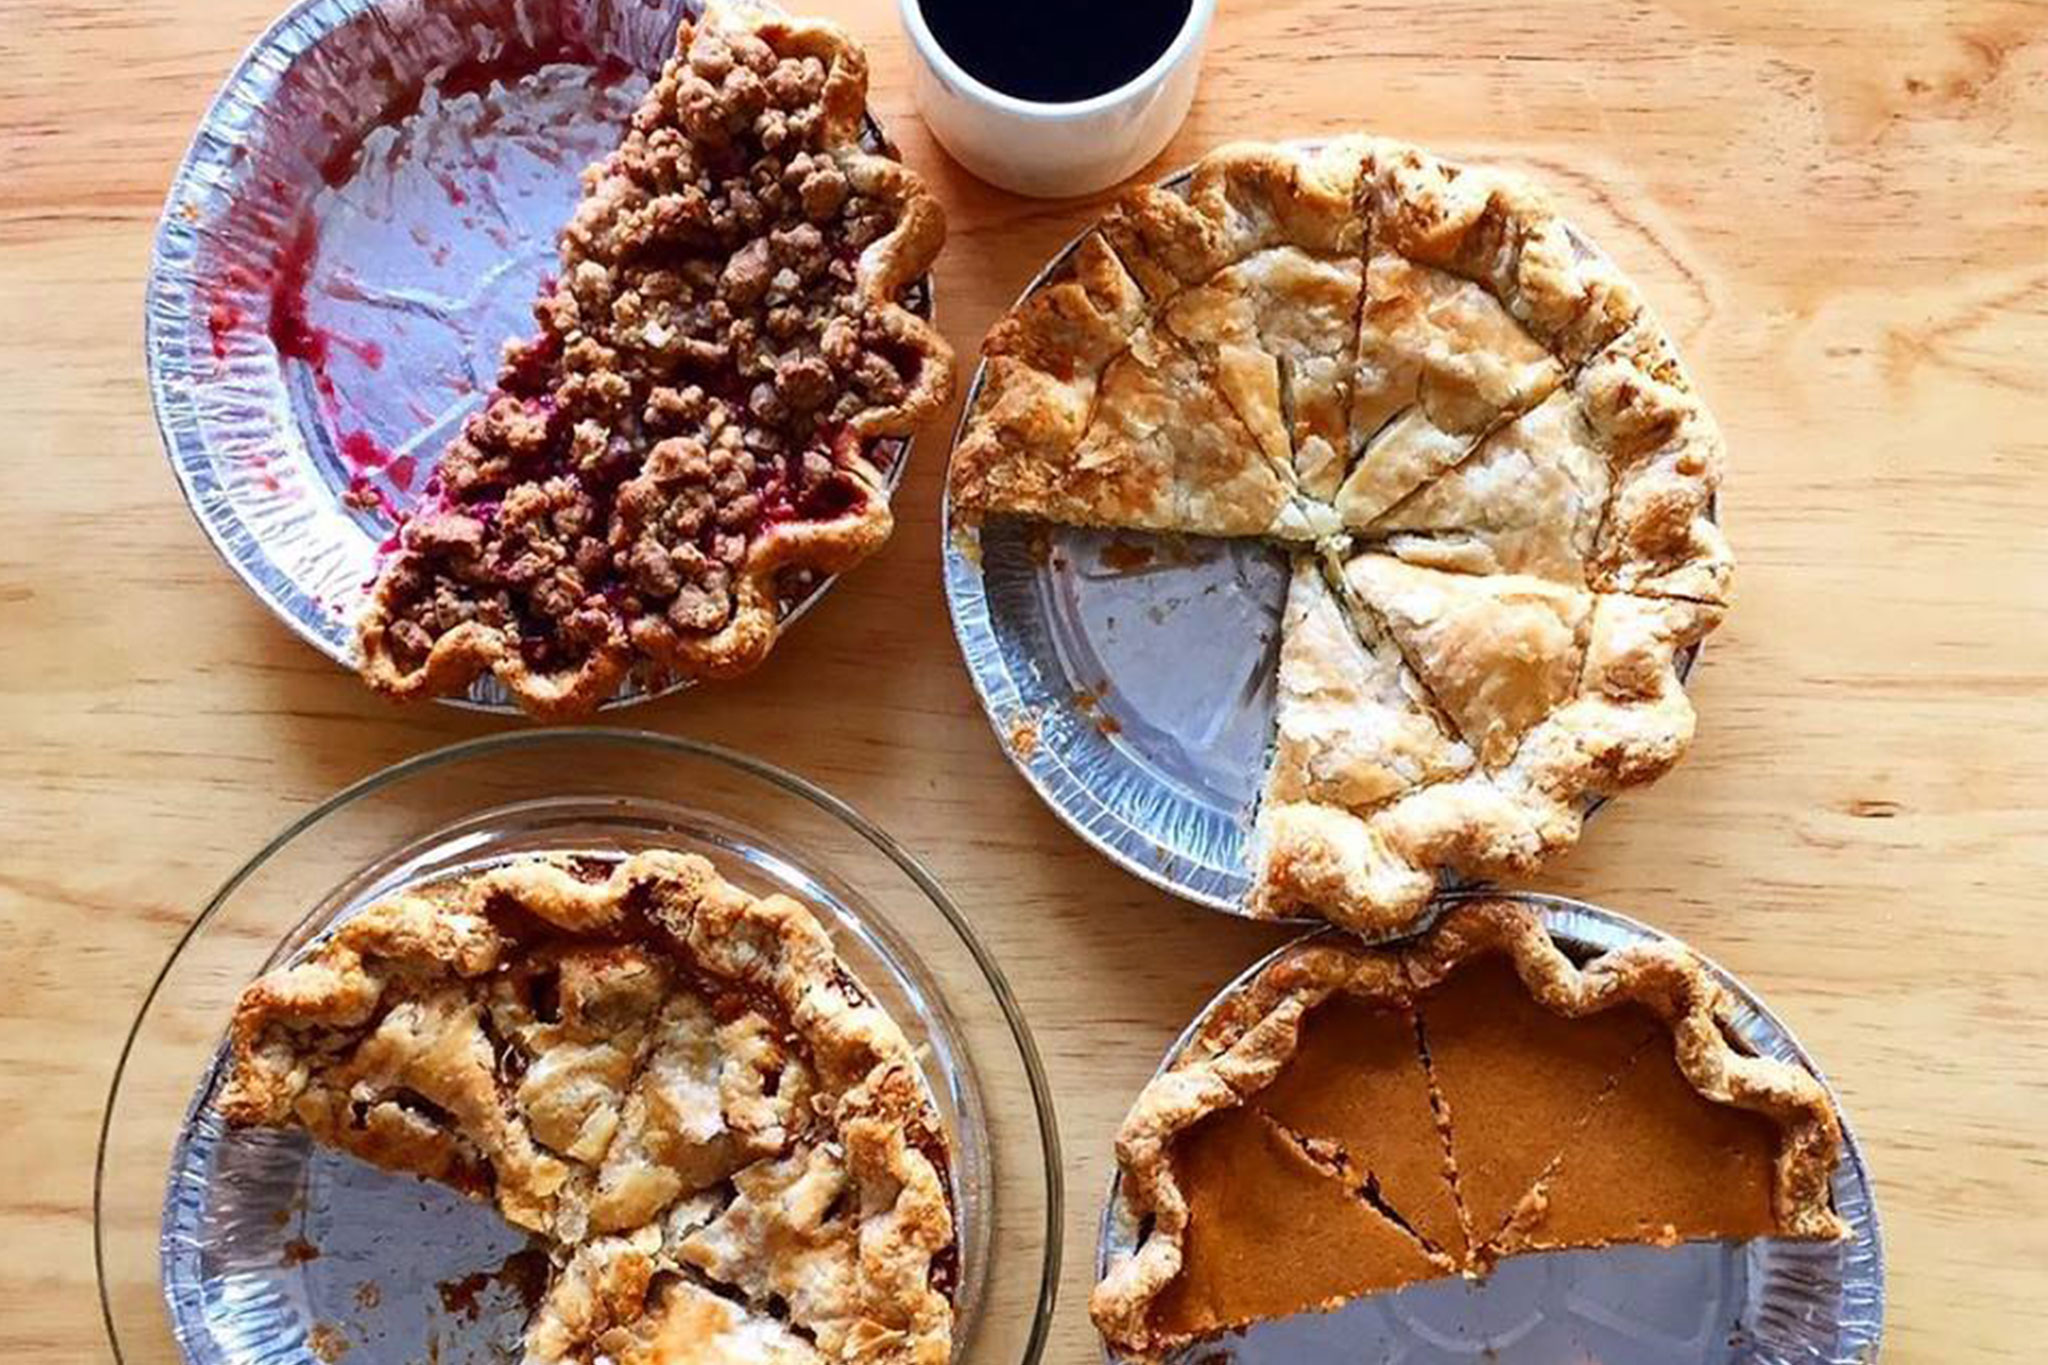 Four different kinds of pies with pieces missing from each